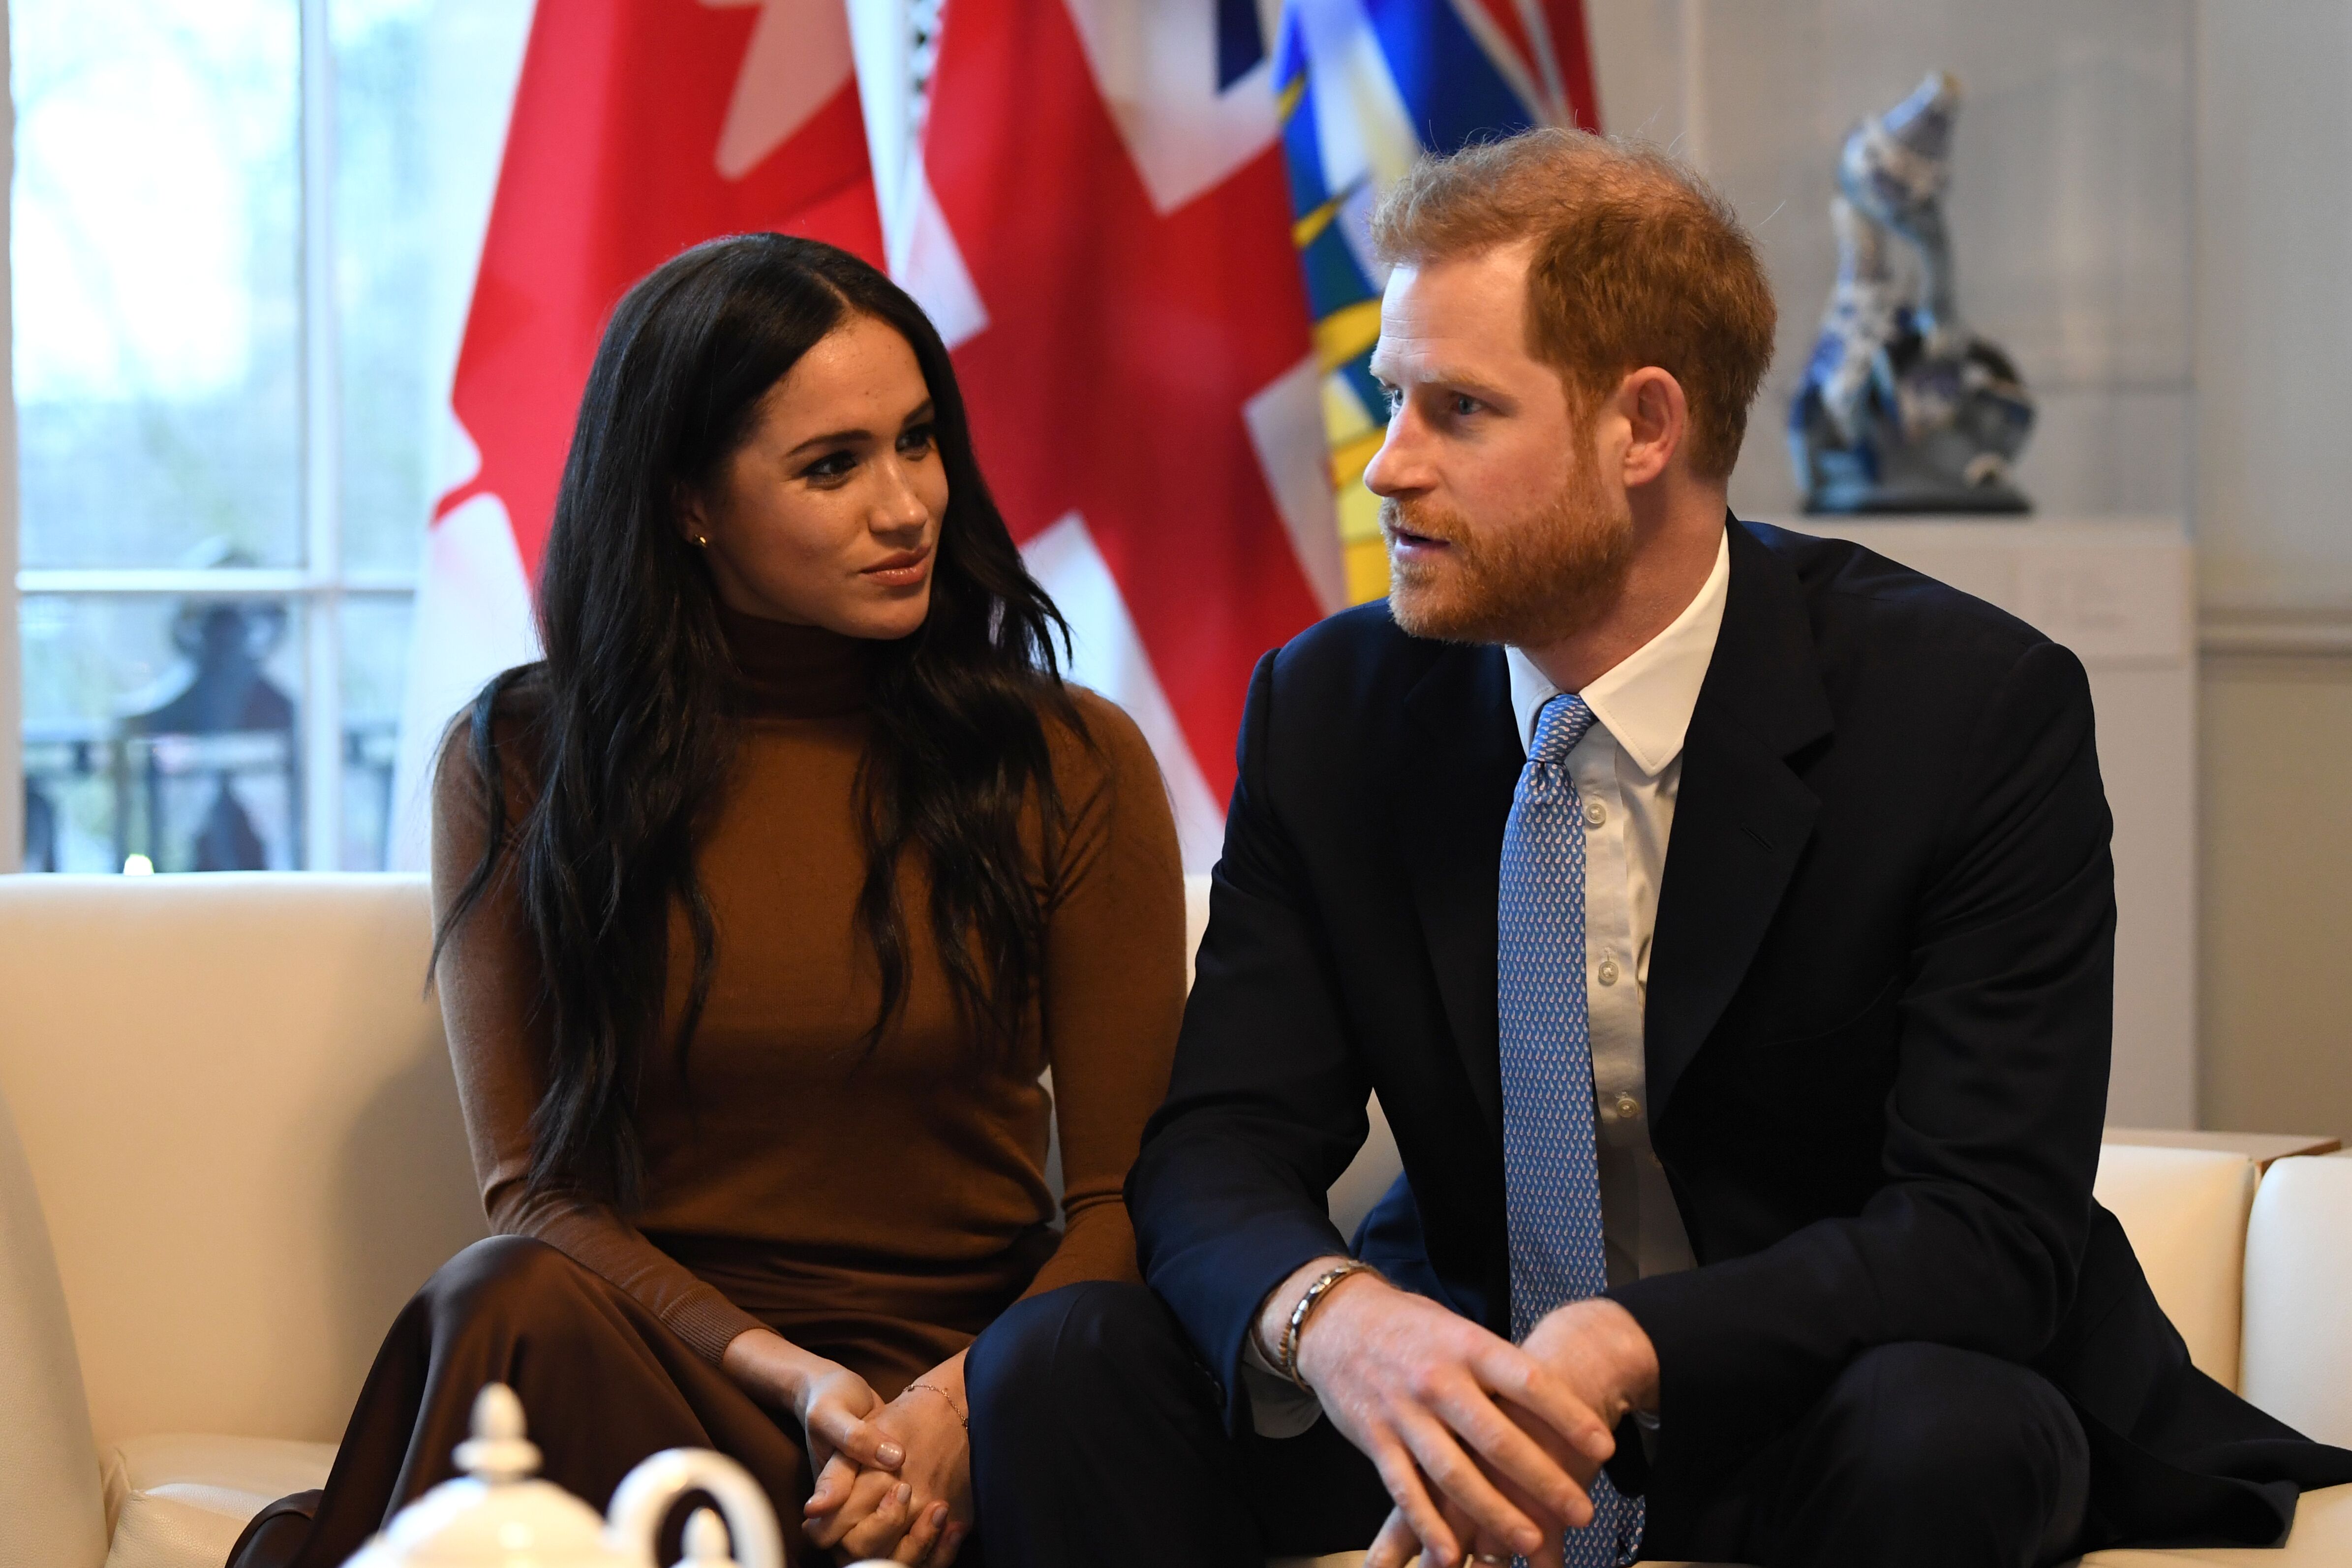 Prince Harry, Duke of Sussex and Meghan, Duchess of Sussex gesture during their visit to Canada House in thanks for the warm Canadian hospitality and support they received during their recent stay in Canada, on January 7, 2020 in London, England | Photo: Getty Images